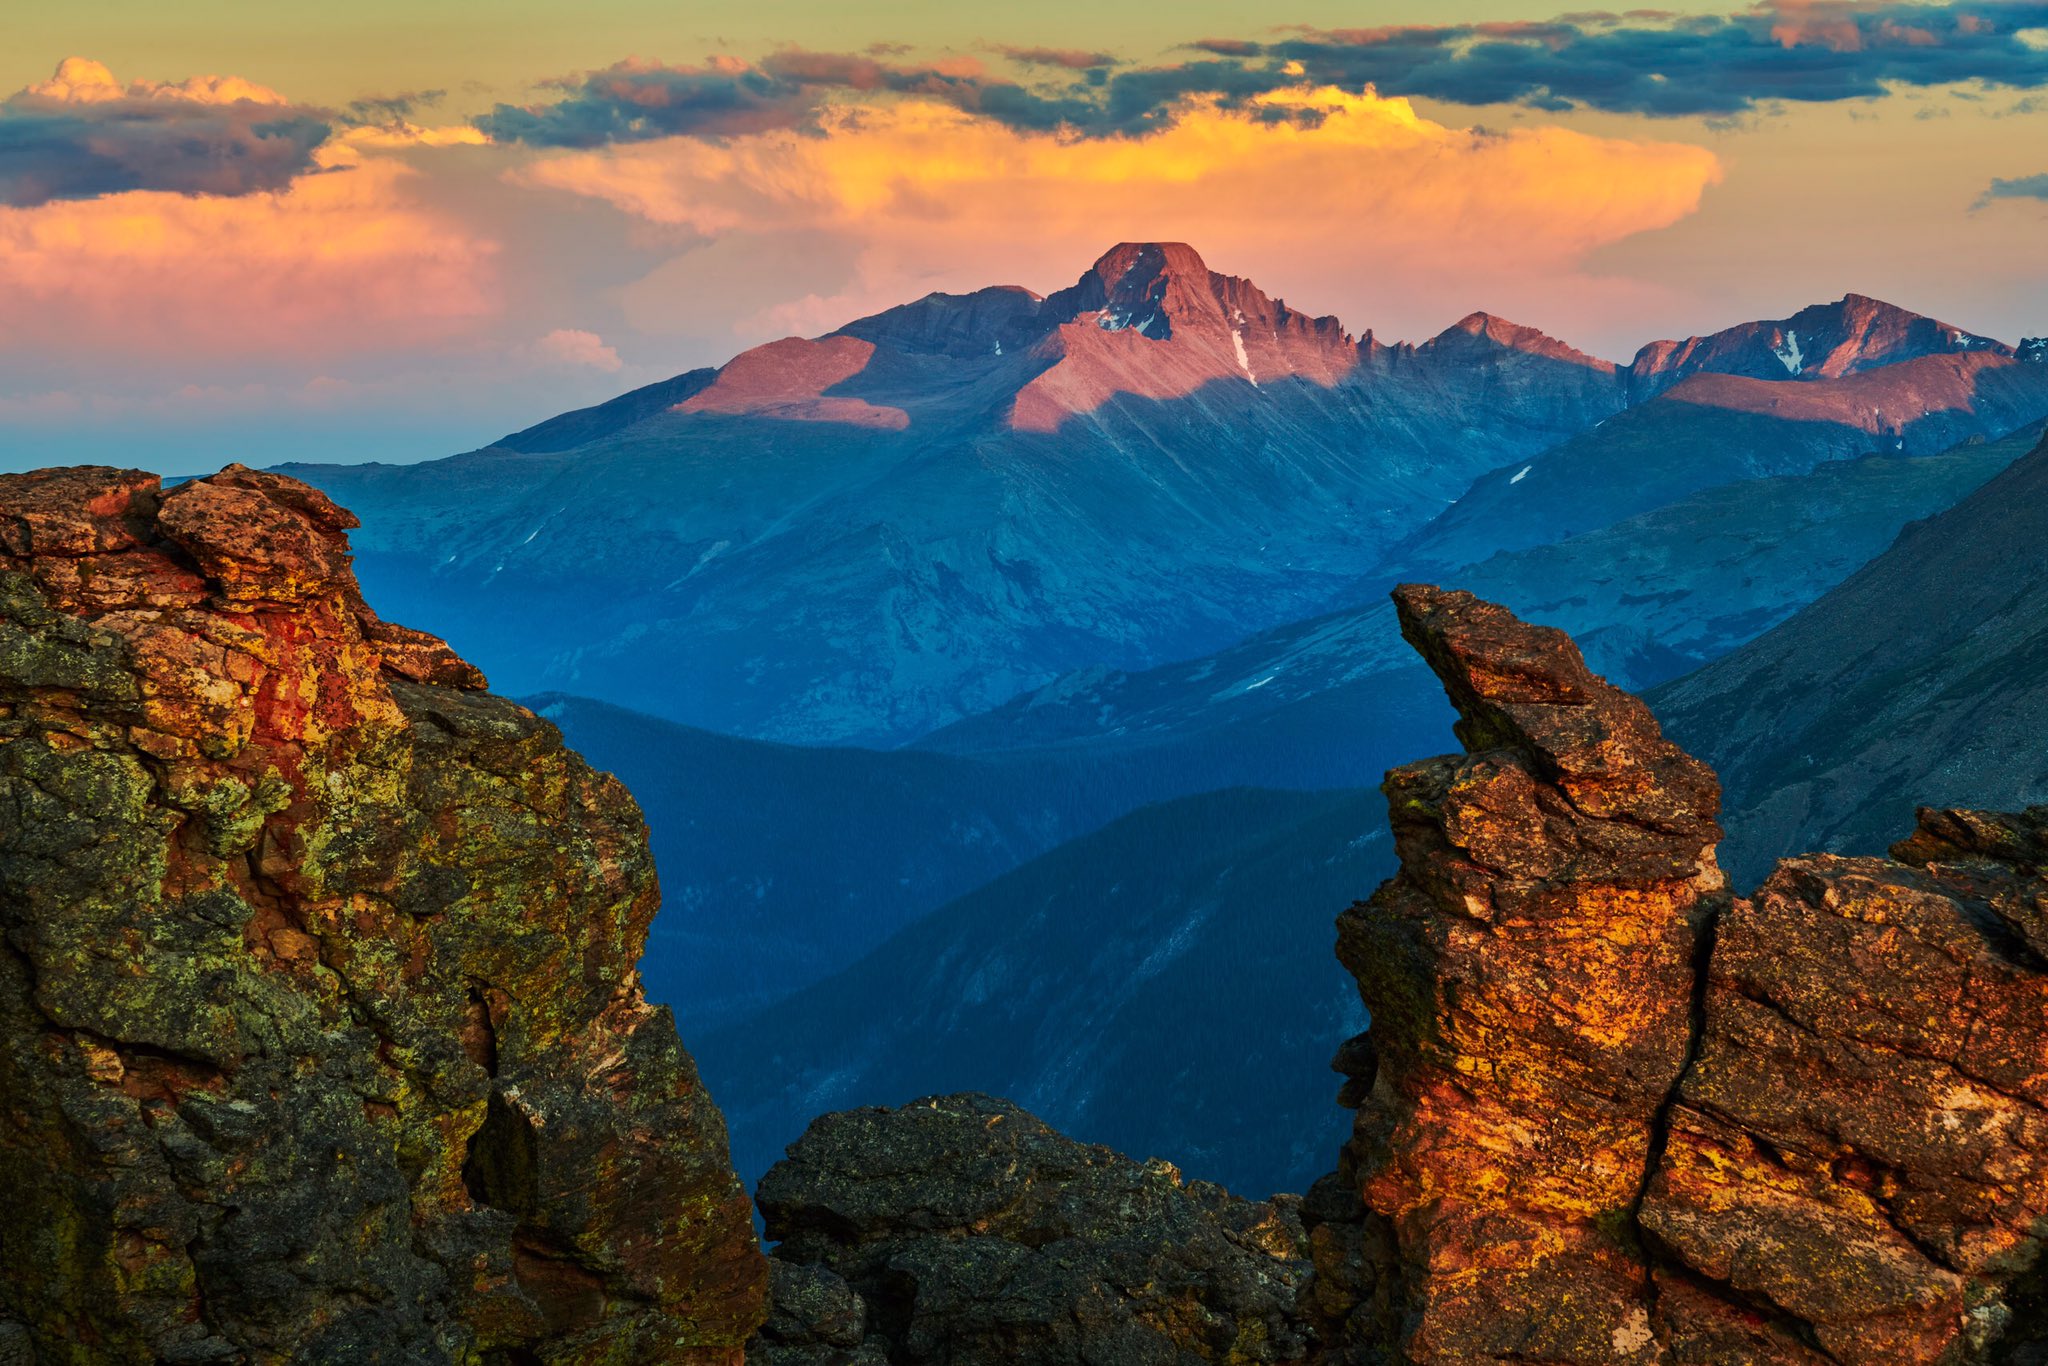 2nd Place A colorful sunset over Longs Peak in Rocky Mountain National Park, Colorado by Michael Ryno Photo @mnryno34